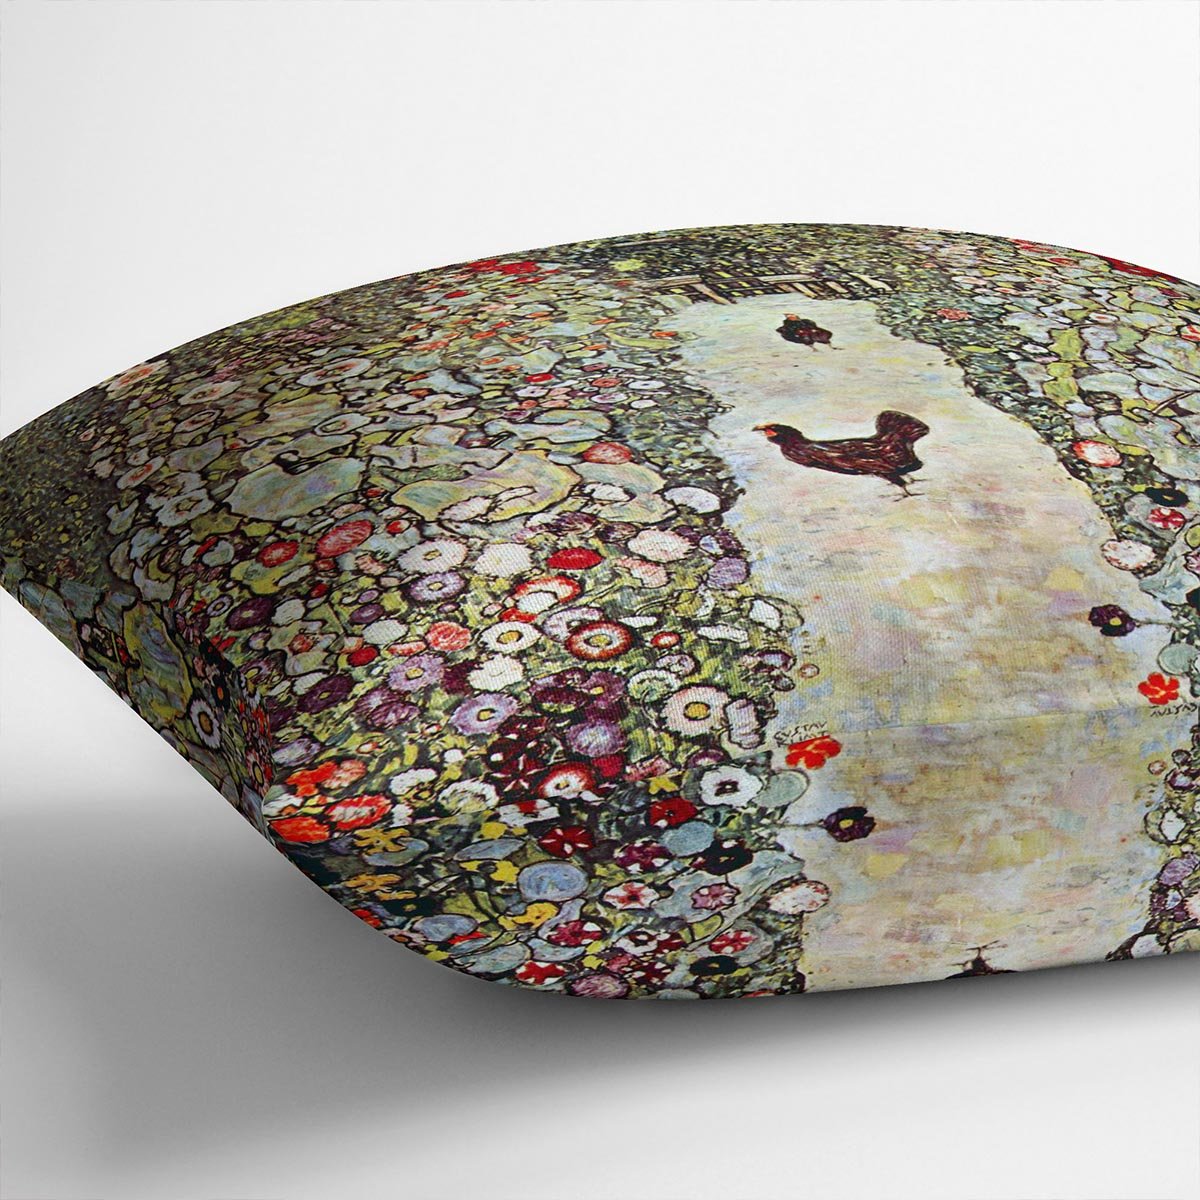 Garden Path with Chickens by Klimt Throw Pillow